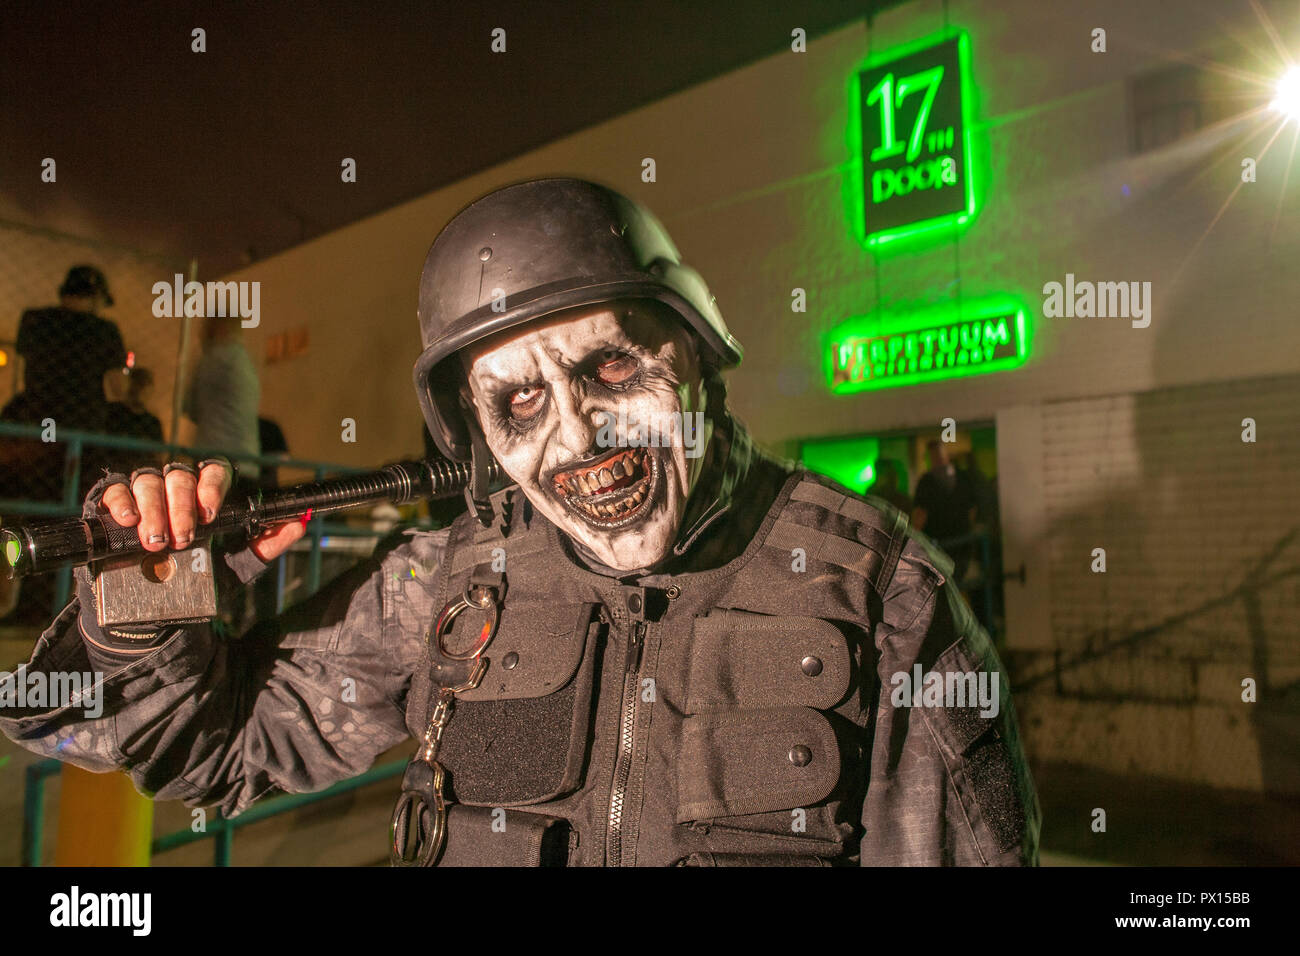 Waving a cattle prod and sporting a grotesque mask, the Main Guard inducts visitors to the 17th Door Haunted Experience on Halloween in Fullerton, CA. Stock Photo